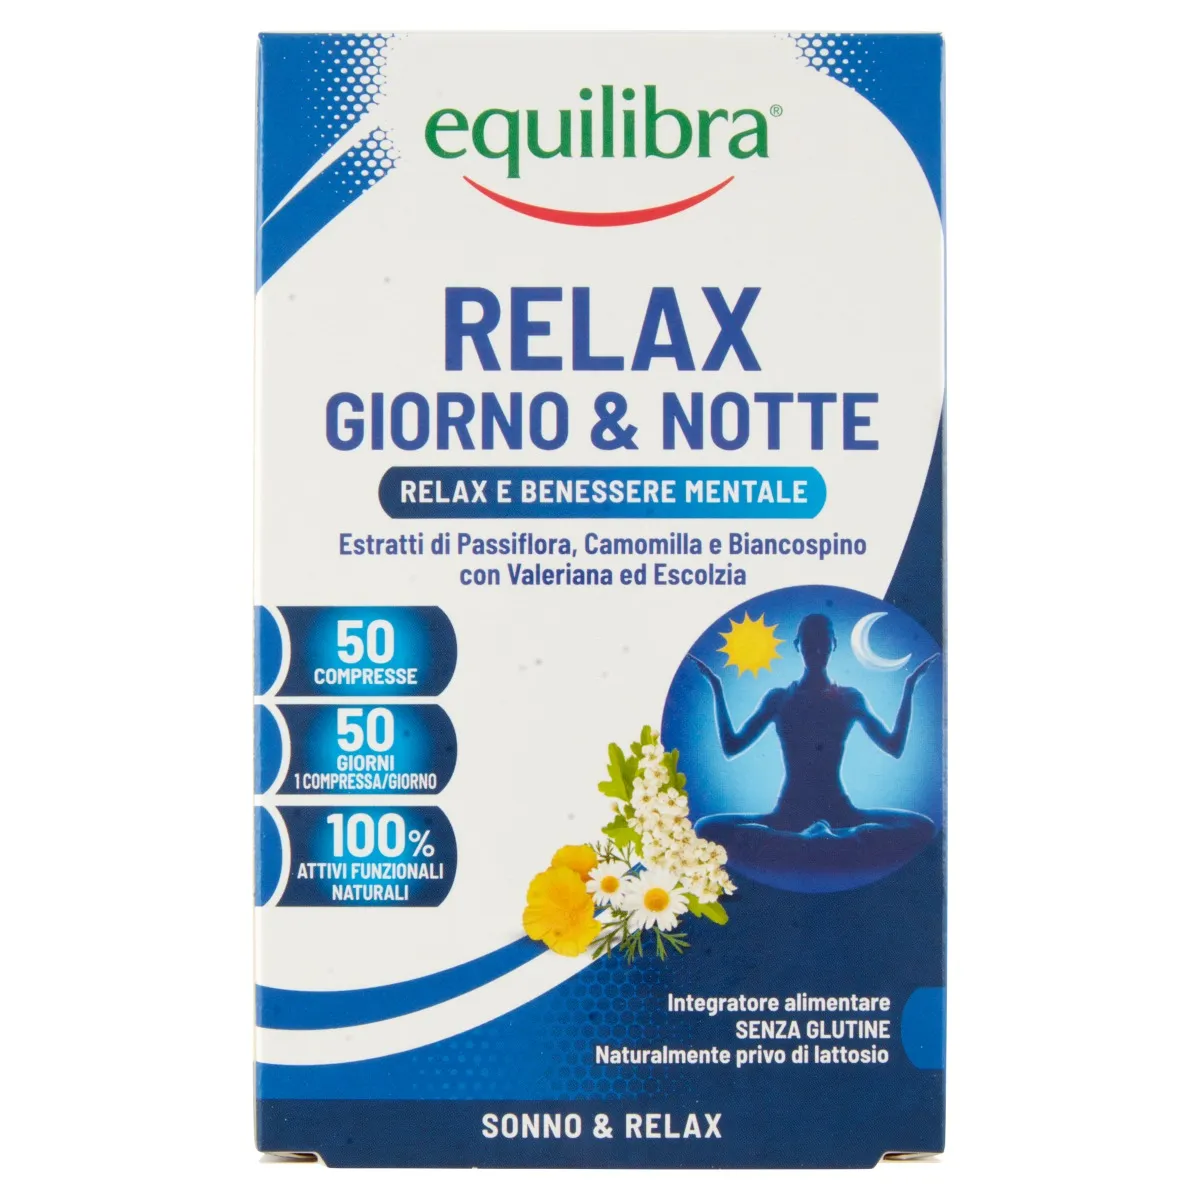 EQUILIBRA RELAX GIORNO & NOTTE 50 COMPRESSE